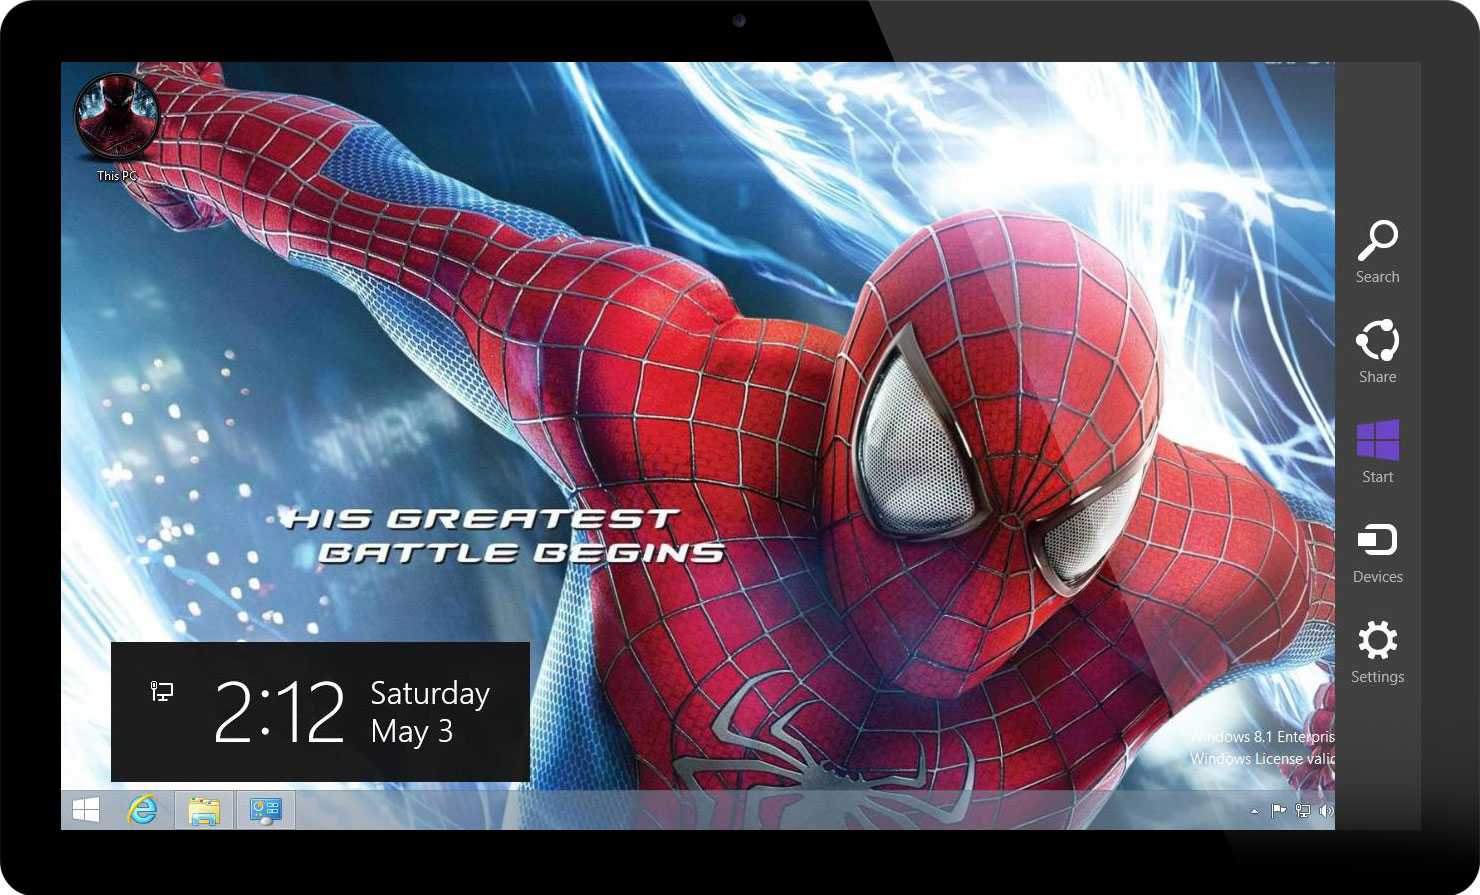 The Amazing Spider-man 2 Theme - Homecoming Spider Man 2 , HD Wallpaper & Backgrounds